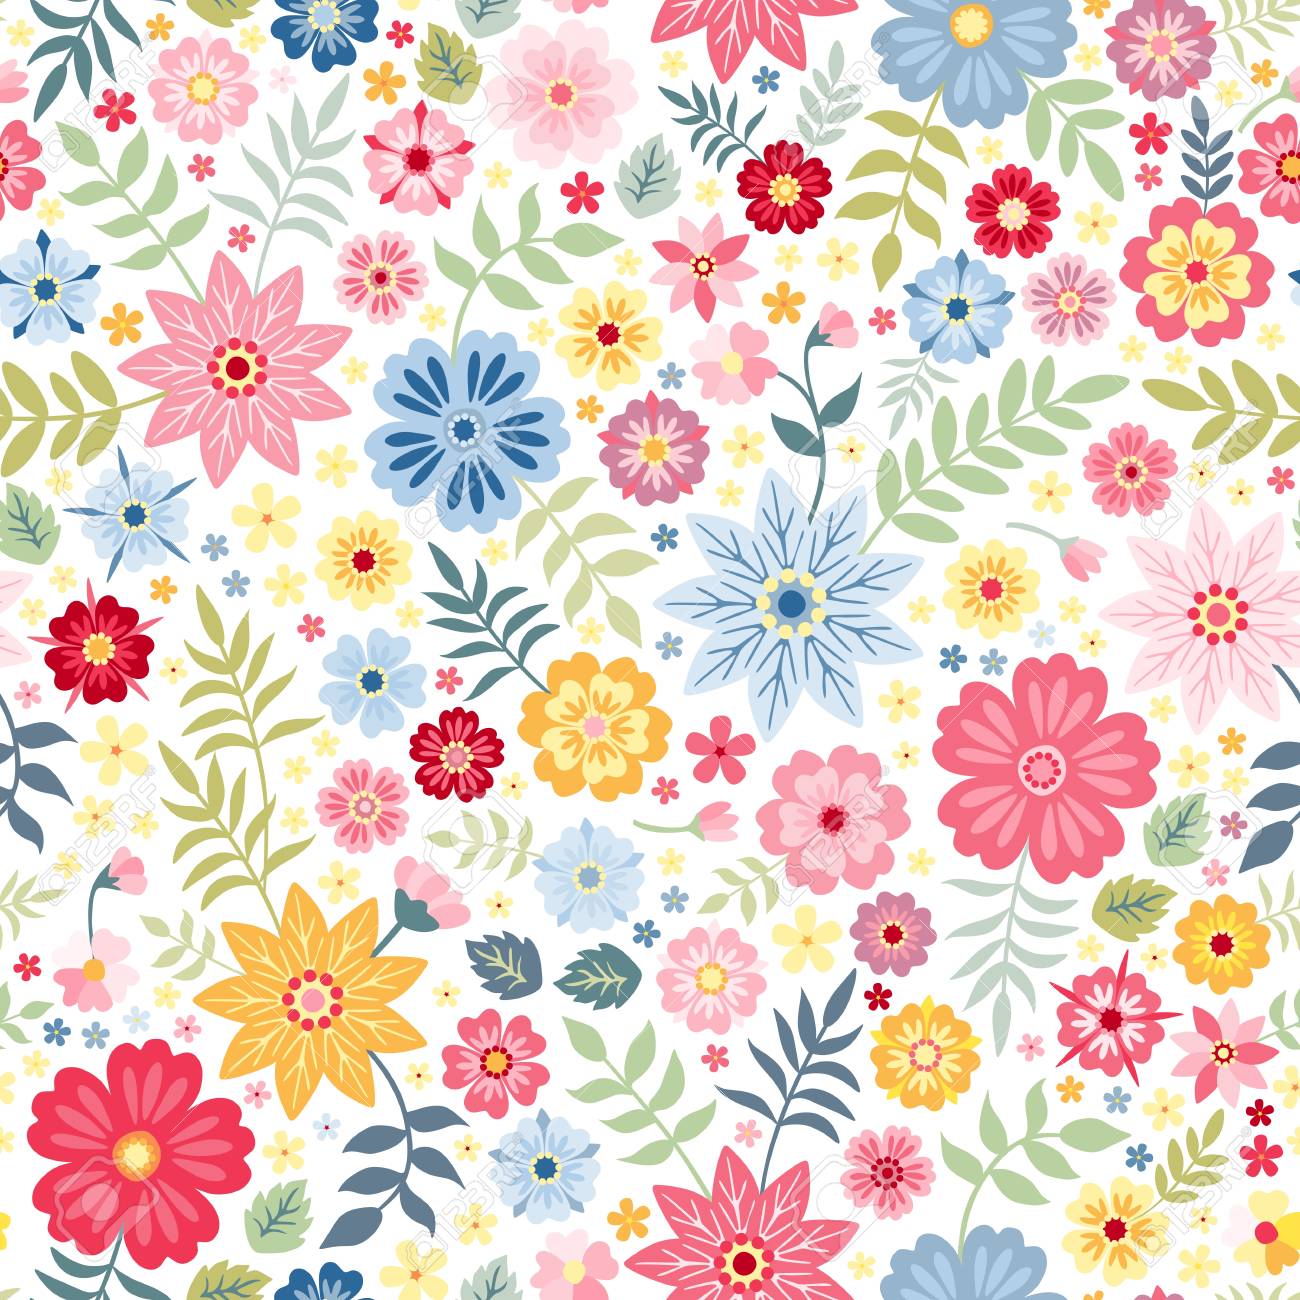 Seamless Ditsy Floral Pattern With Cute Little Flowers On White